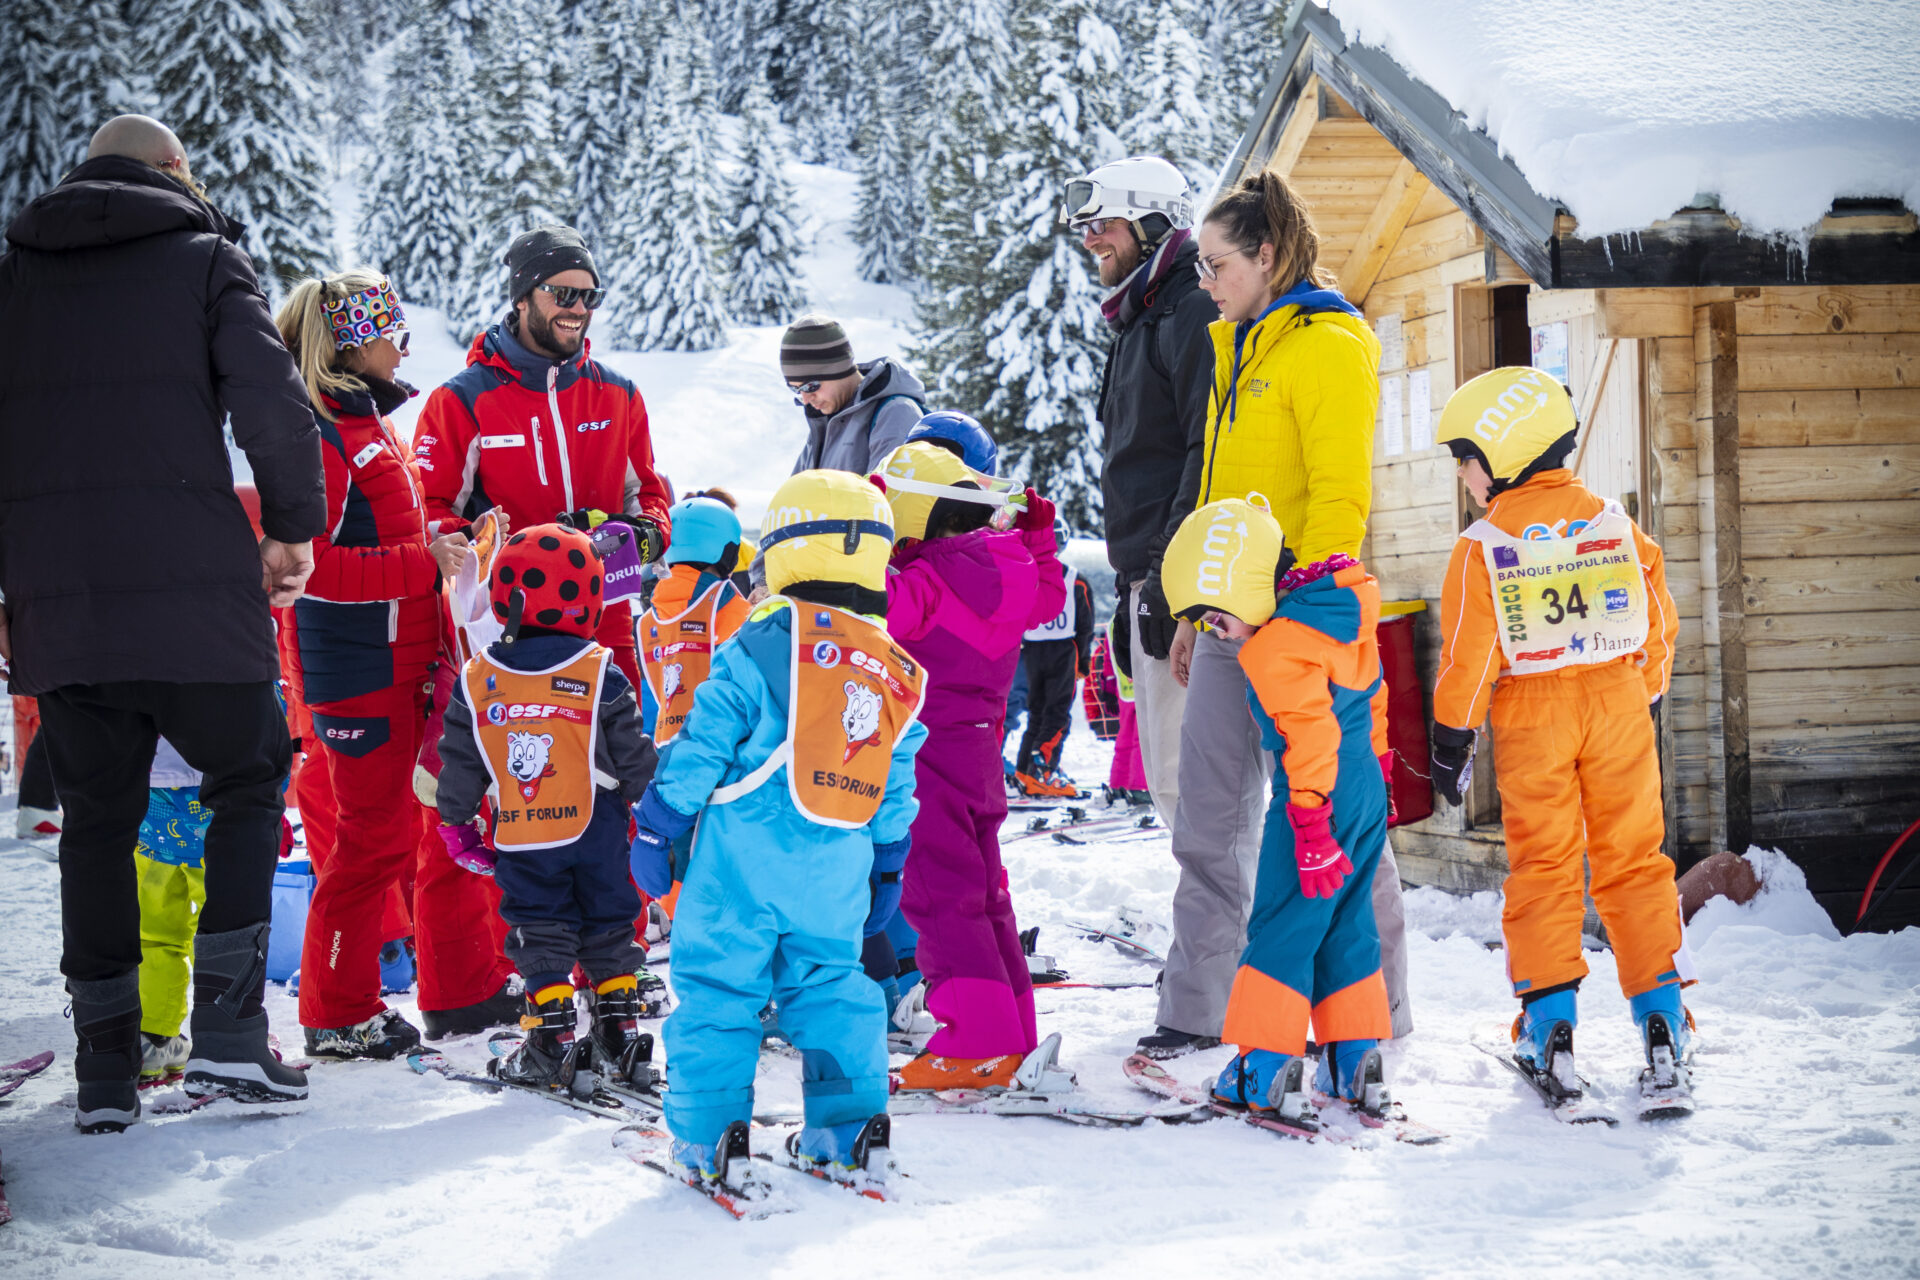 An image of children being escorting to the ski school